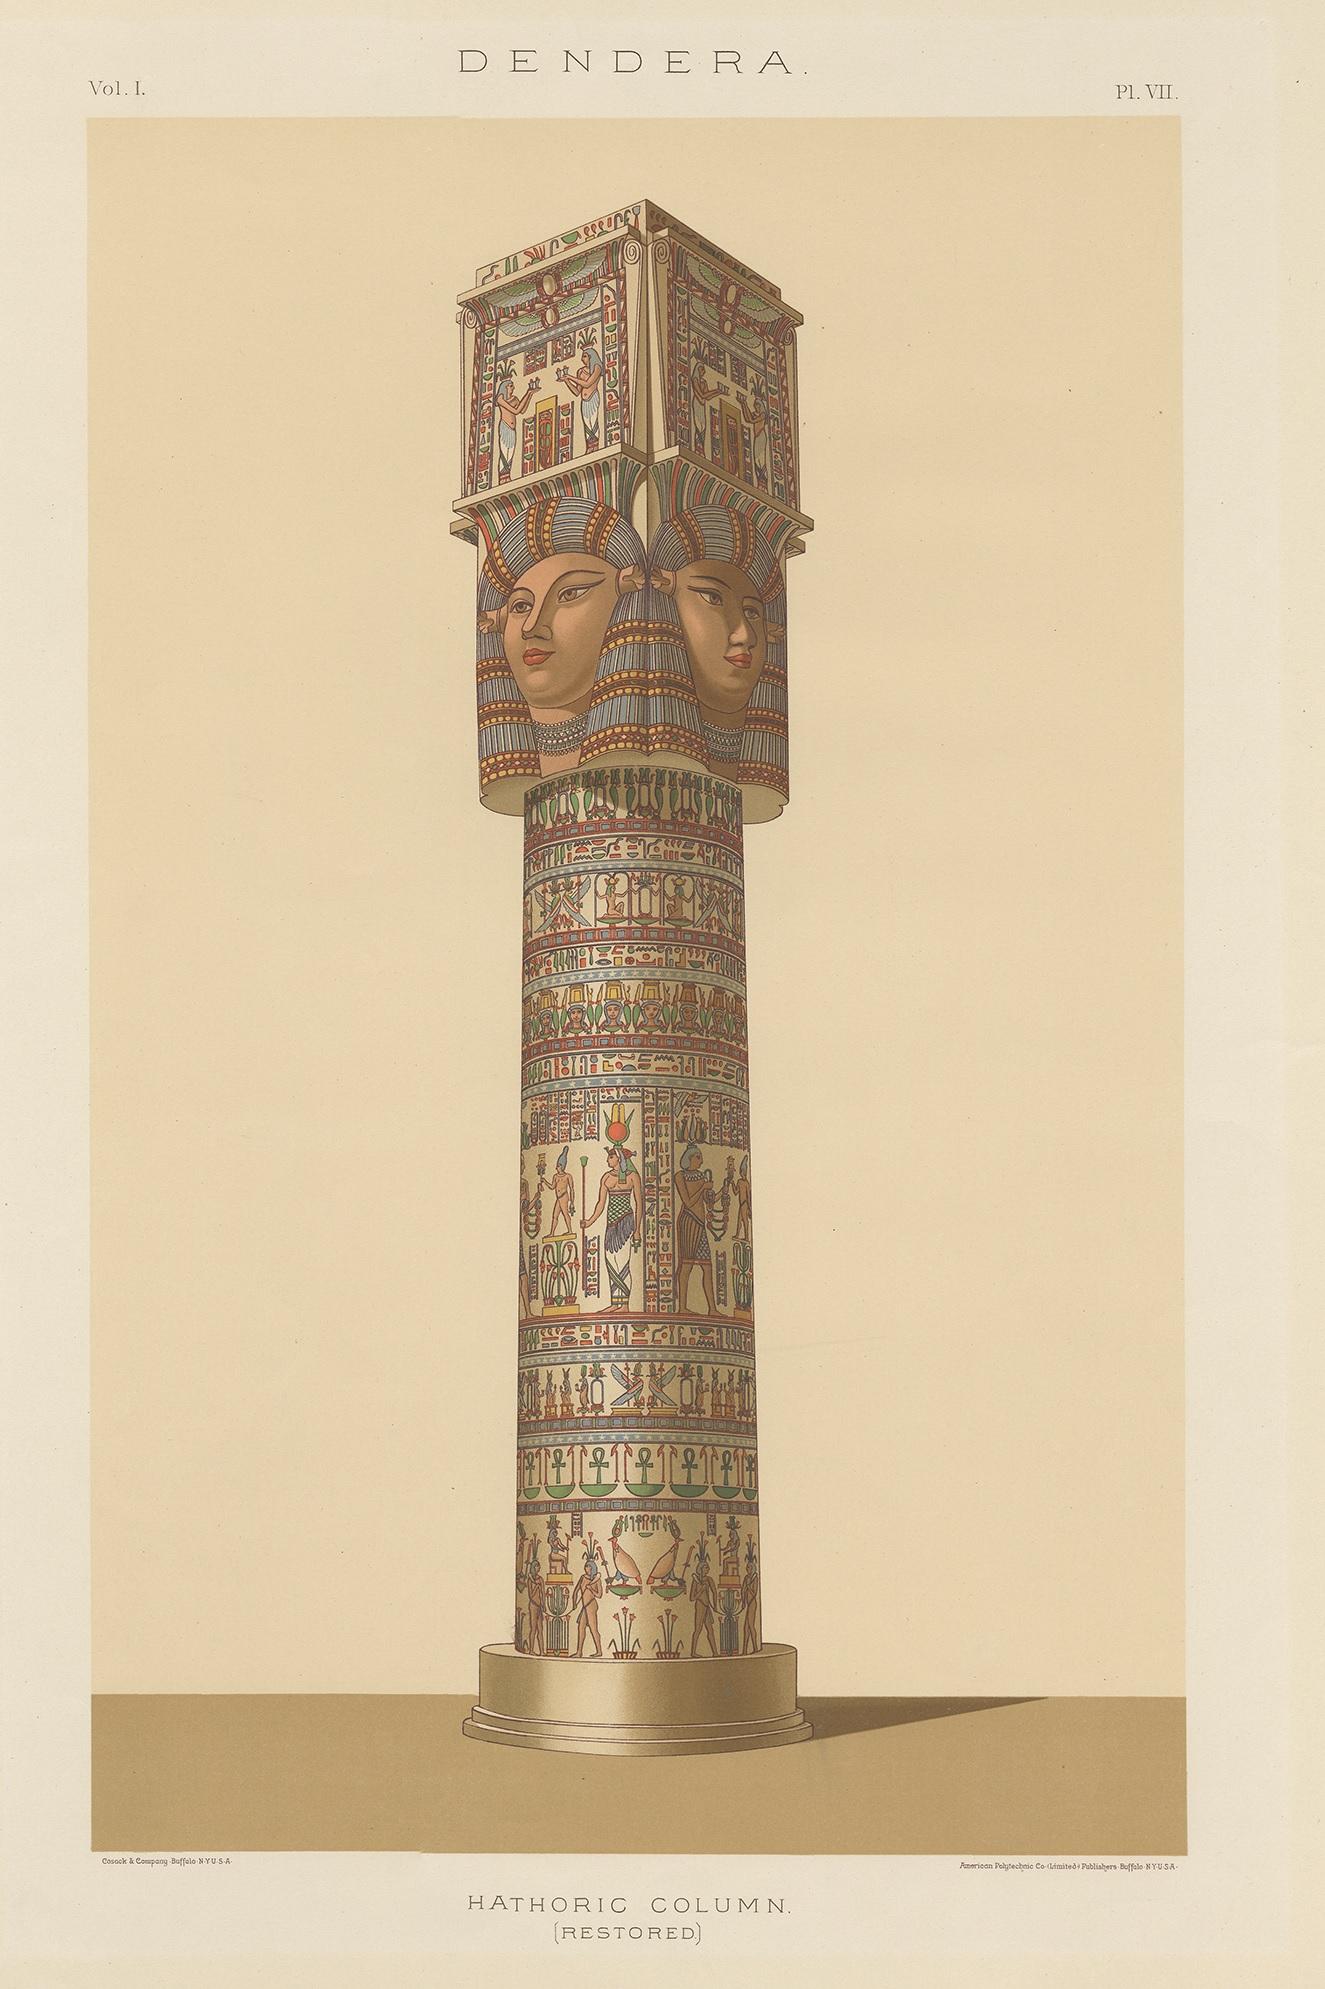 Large lithograph of the Hathoric column of the portico of the Temple of Dendera. This print originates from 'Ancient Egypt or Mizraim' by S.A. Binion, 1887.